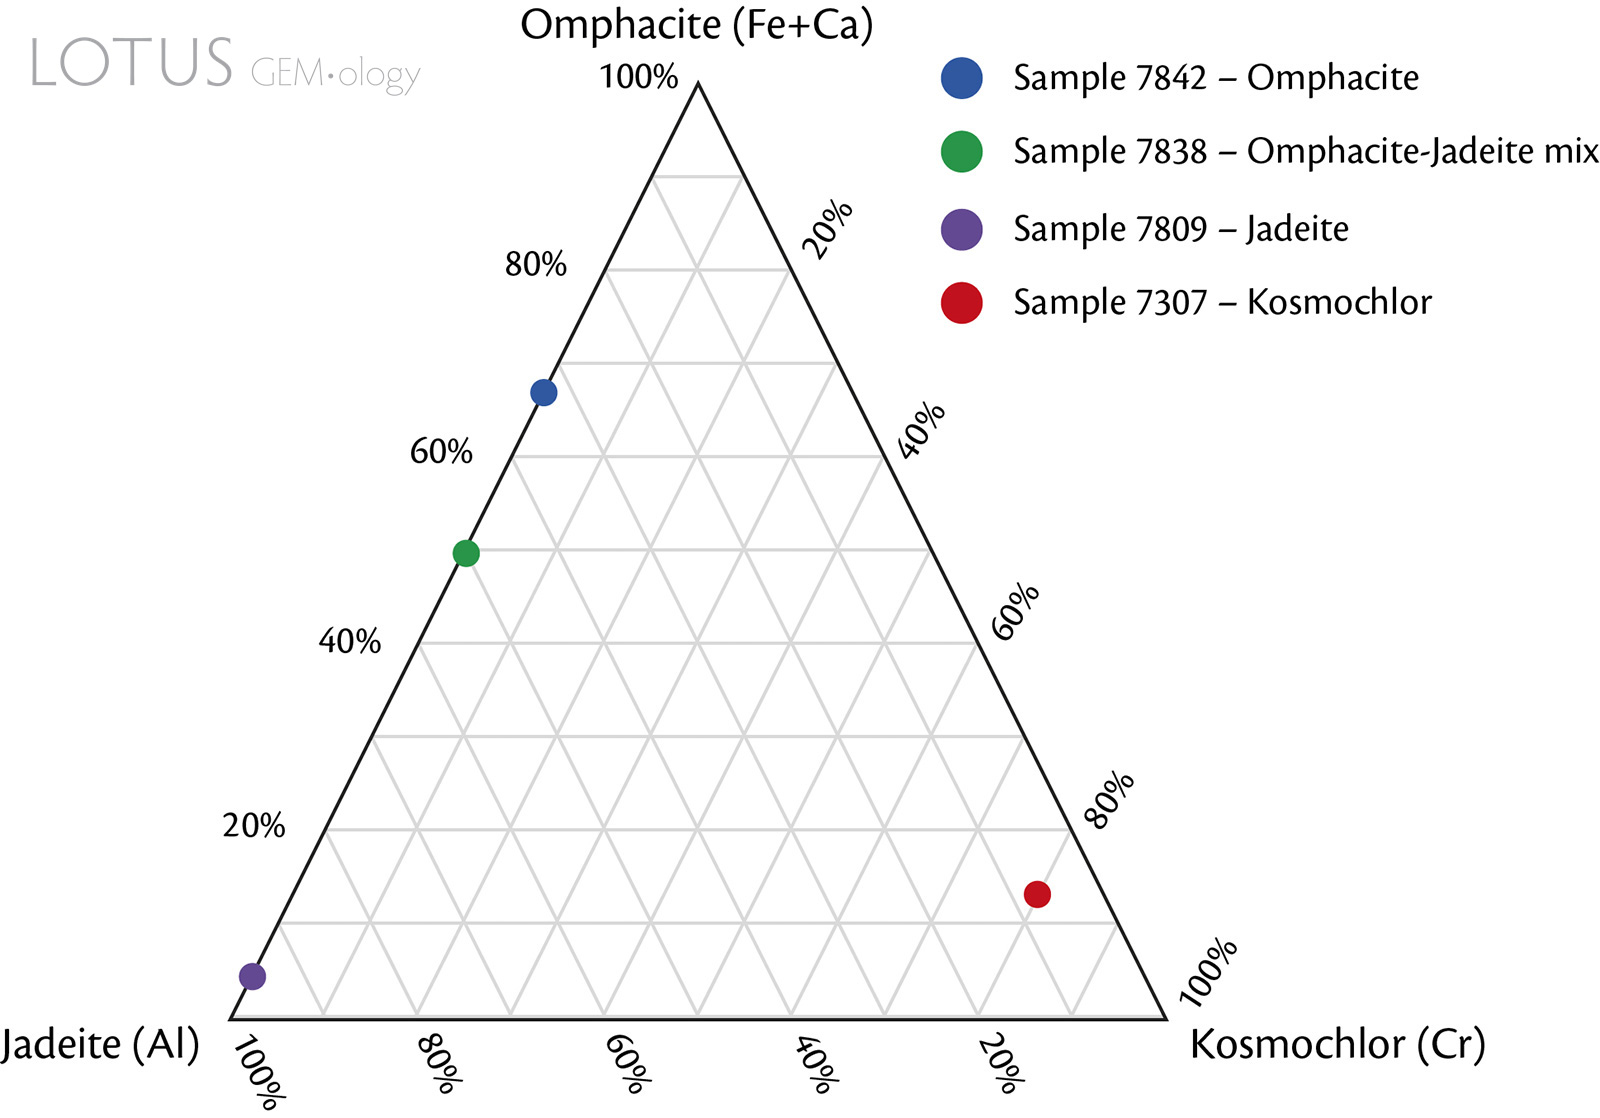 Figure 6. Compositional ternary plot of the fei cui samples. Mineral compositions were normalised by the main associated cation (or combination of cations) based on EDXRF data. Note that the EDXRF chemical analyses are limited because they are only semi-quantitative.